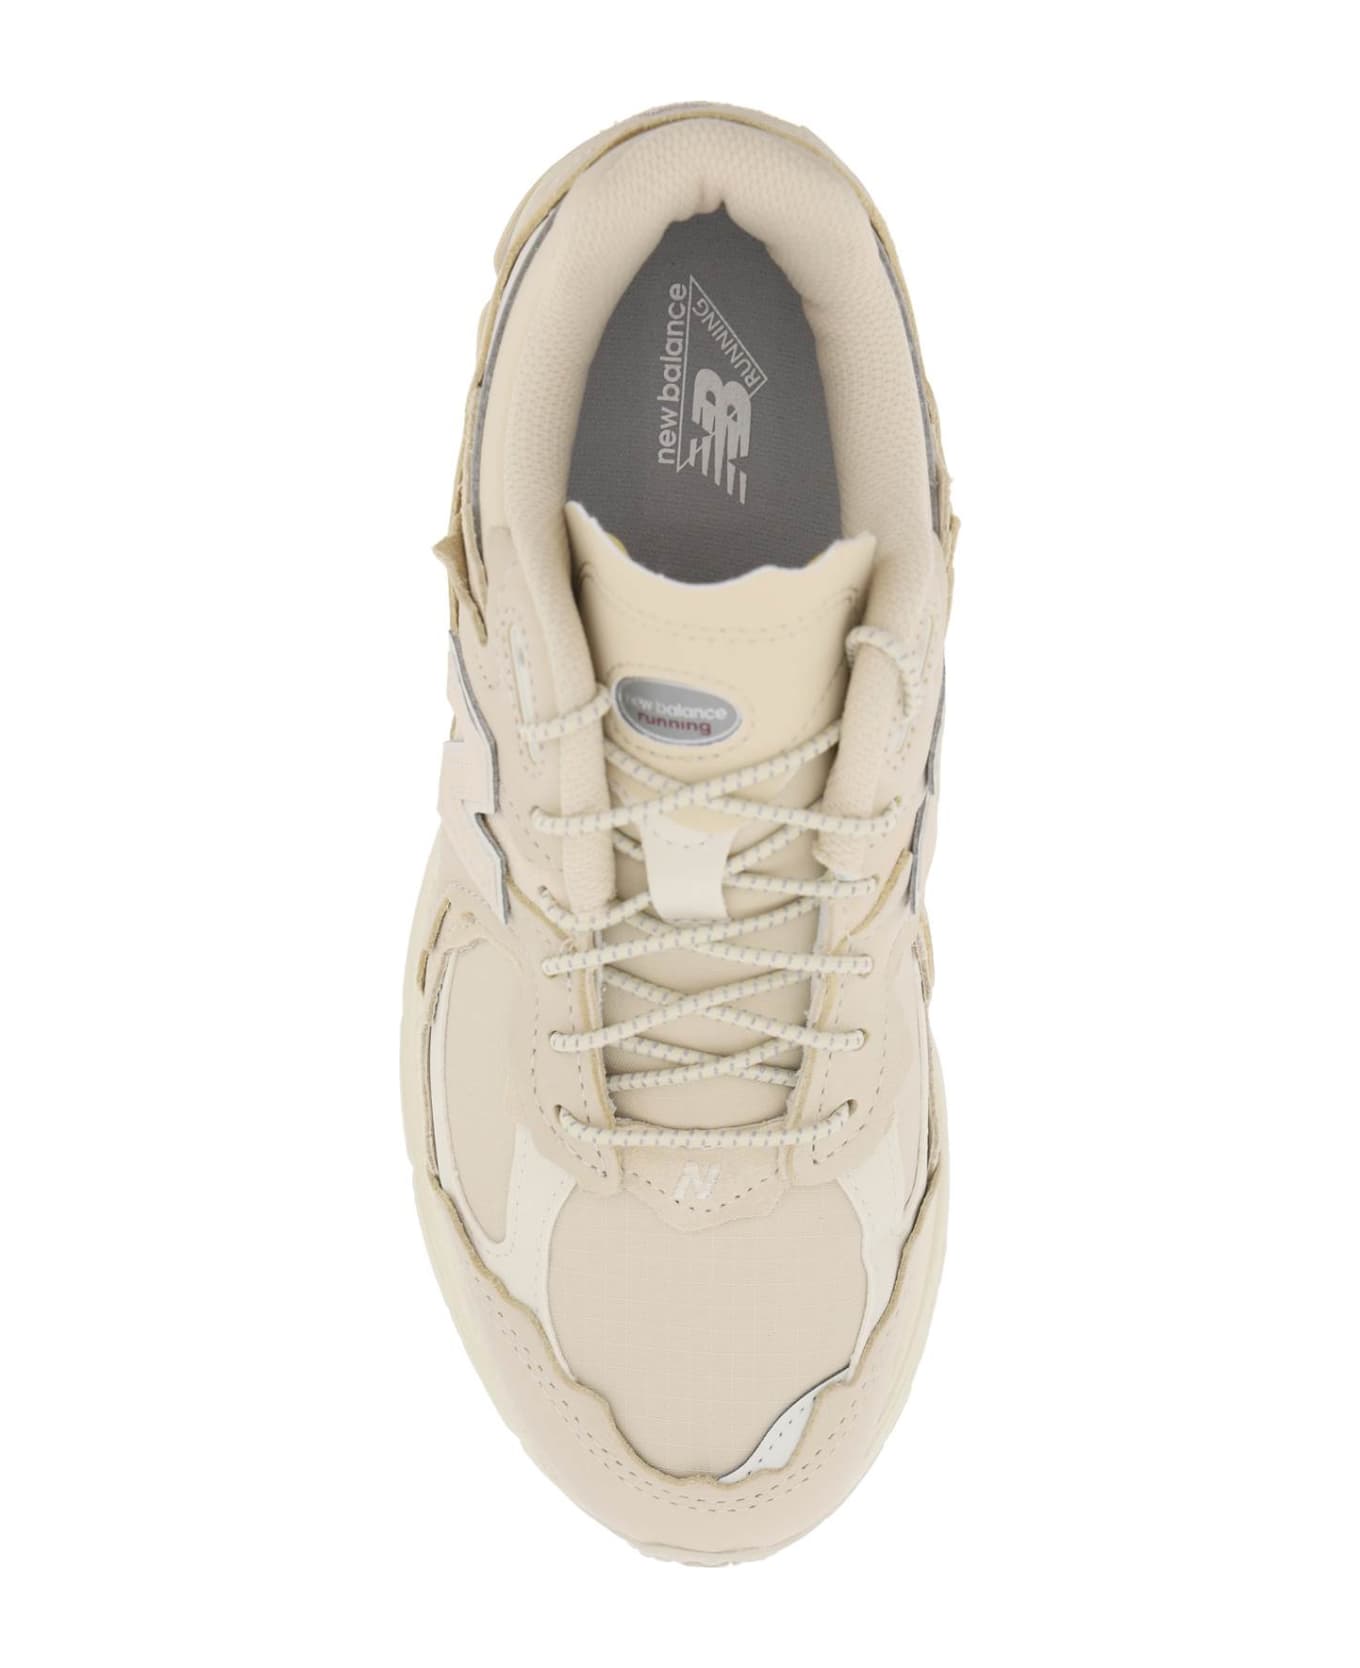 New Balance 2002rd Sneakers - SAND STONE (Beige)